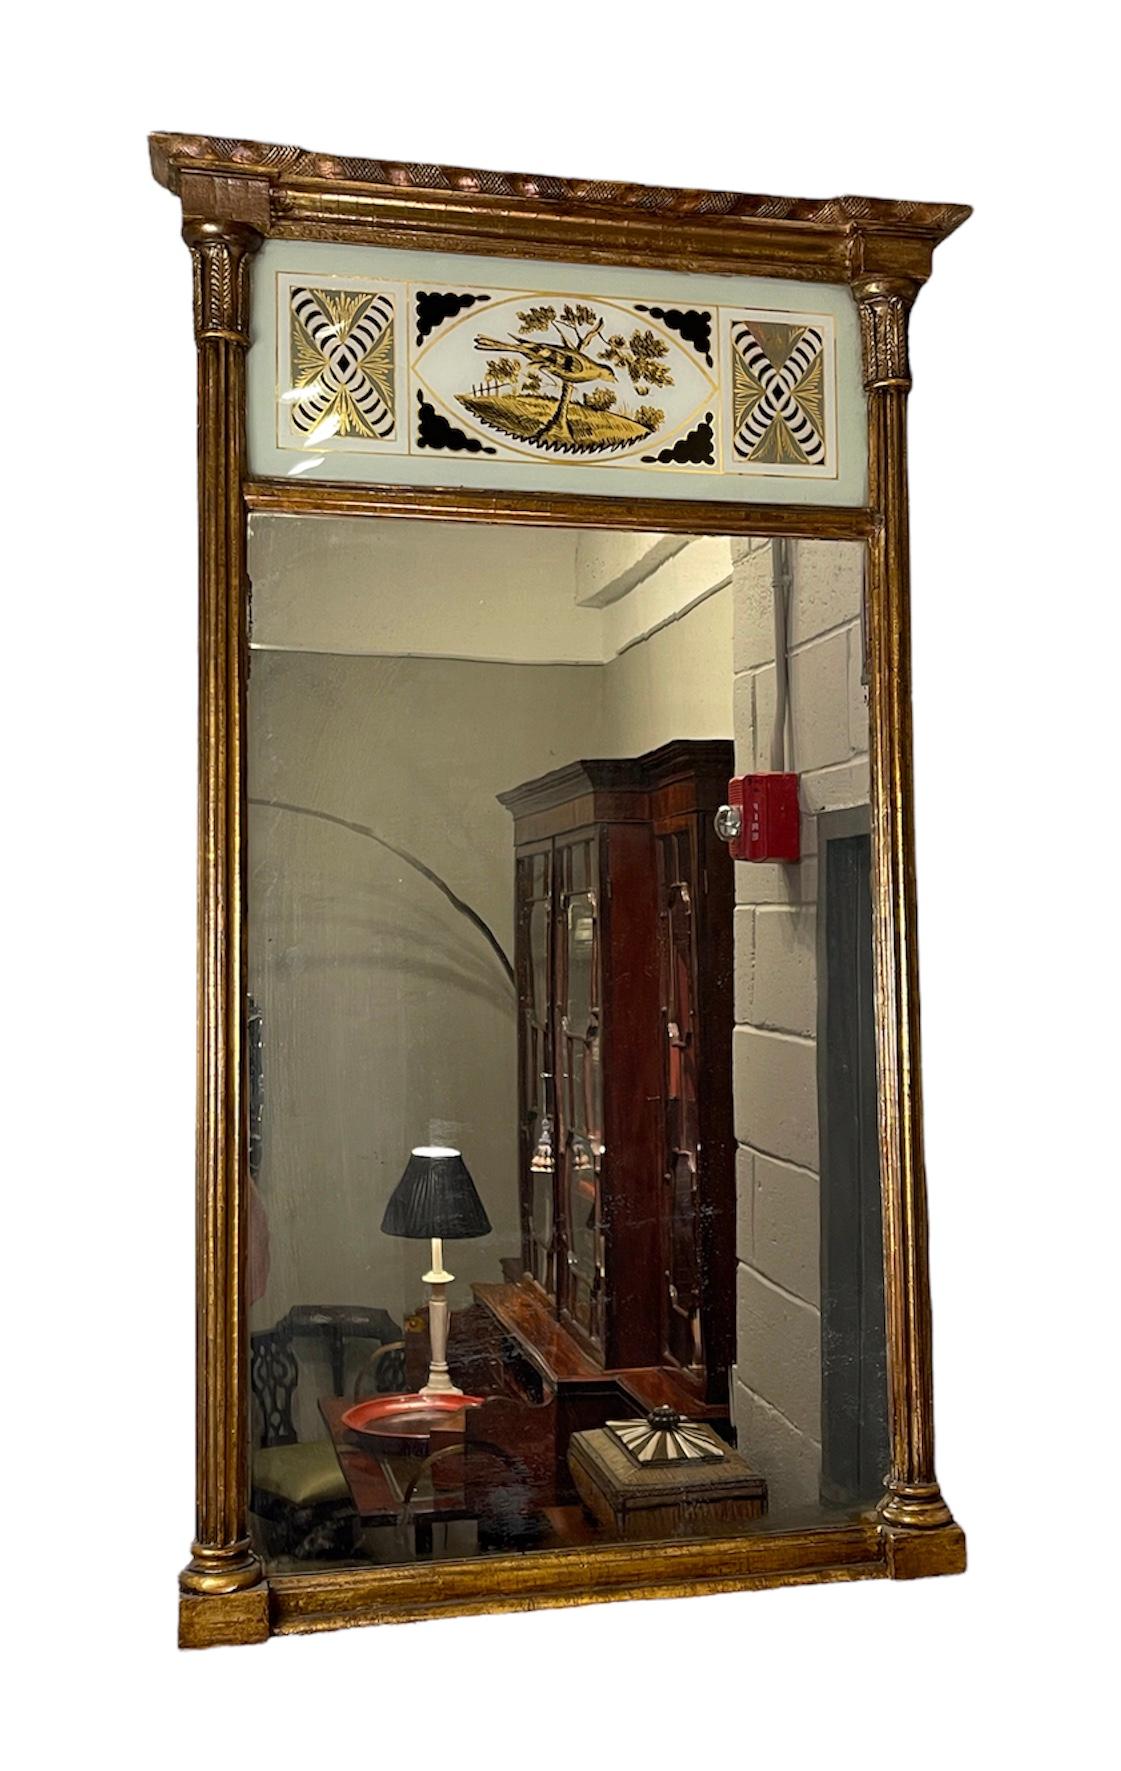 This American Federal gilt-wood mirror dates 
Circa 1790, it’s lower rectangular antique mirror plate below 
A black, white & gold verre eglomise panel. The lower plates flanked by columns having rounded bases and floral capitals. The Top molding